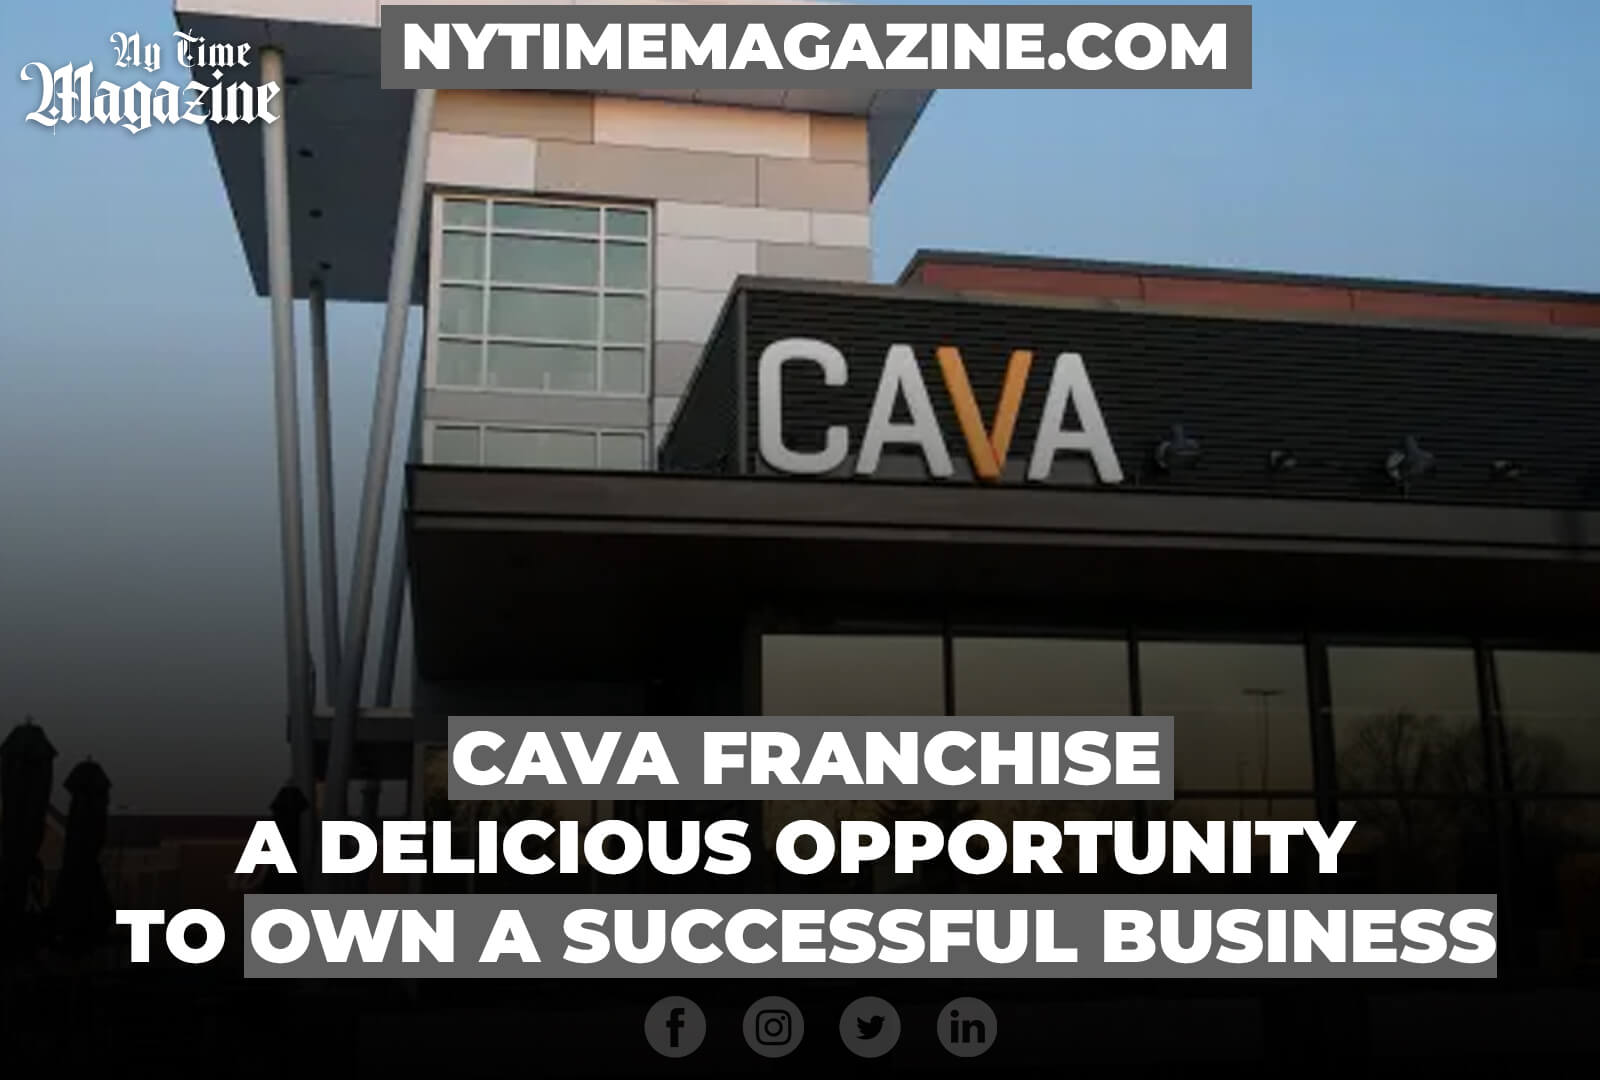 CAVA FRANCHISE A DELICIOUS OPPORTUNITY TO OWN A SUCCESSFUL BUSINESS